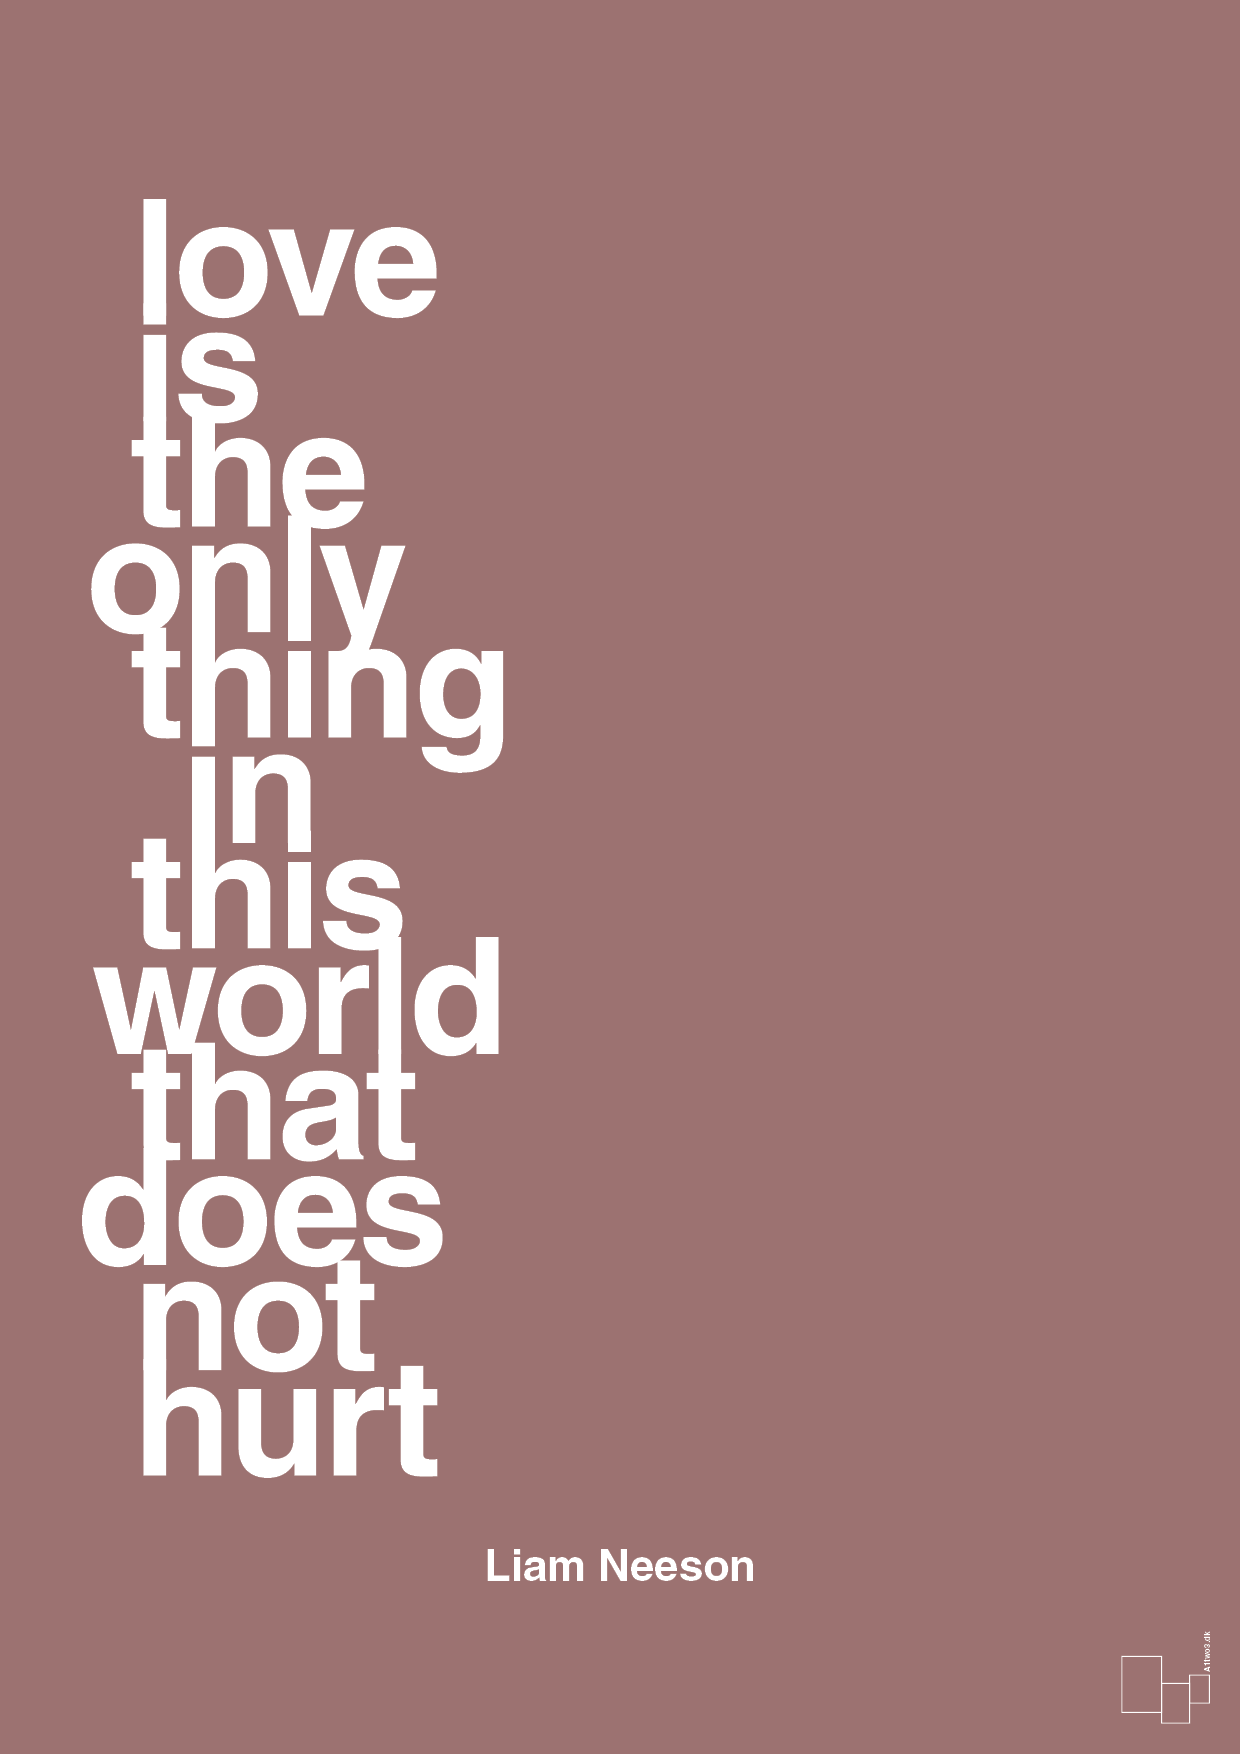 love is the only thing in this world that does not hurt - Plakat med Citater i Plum